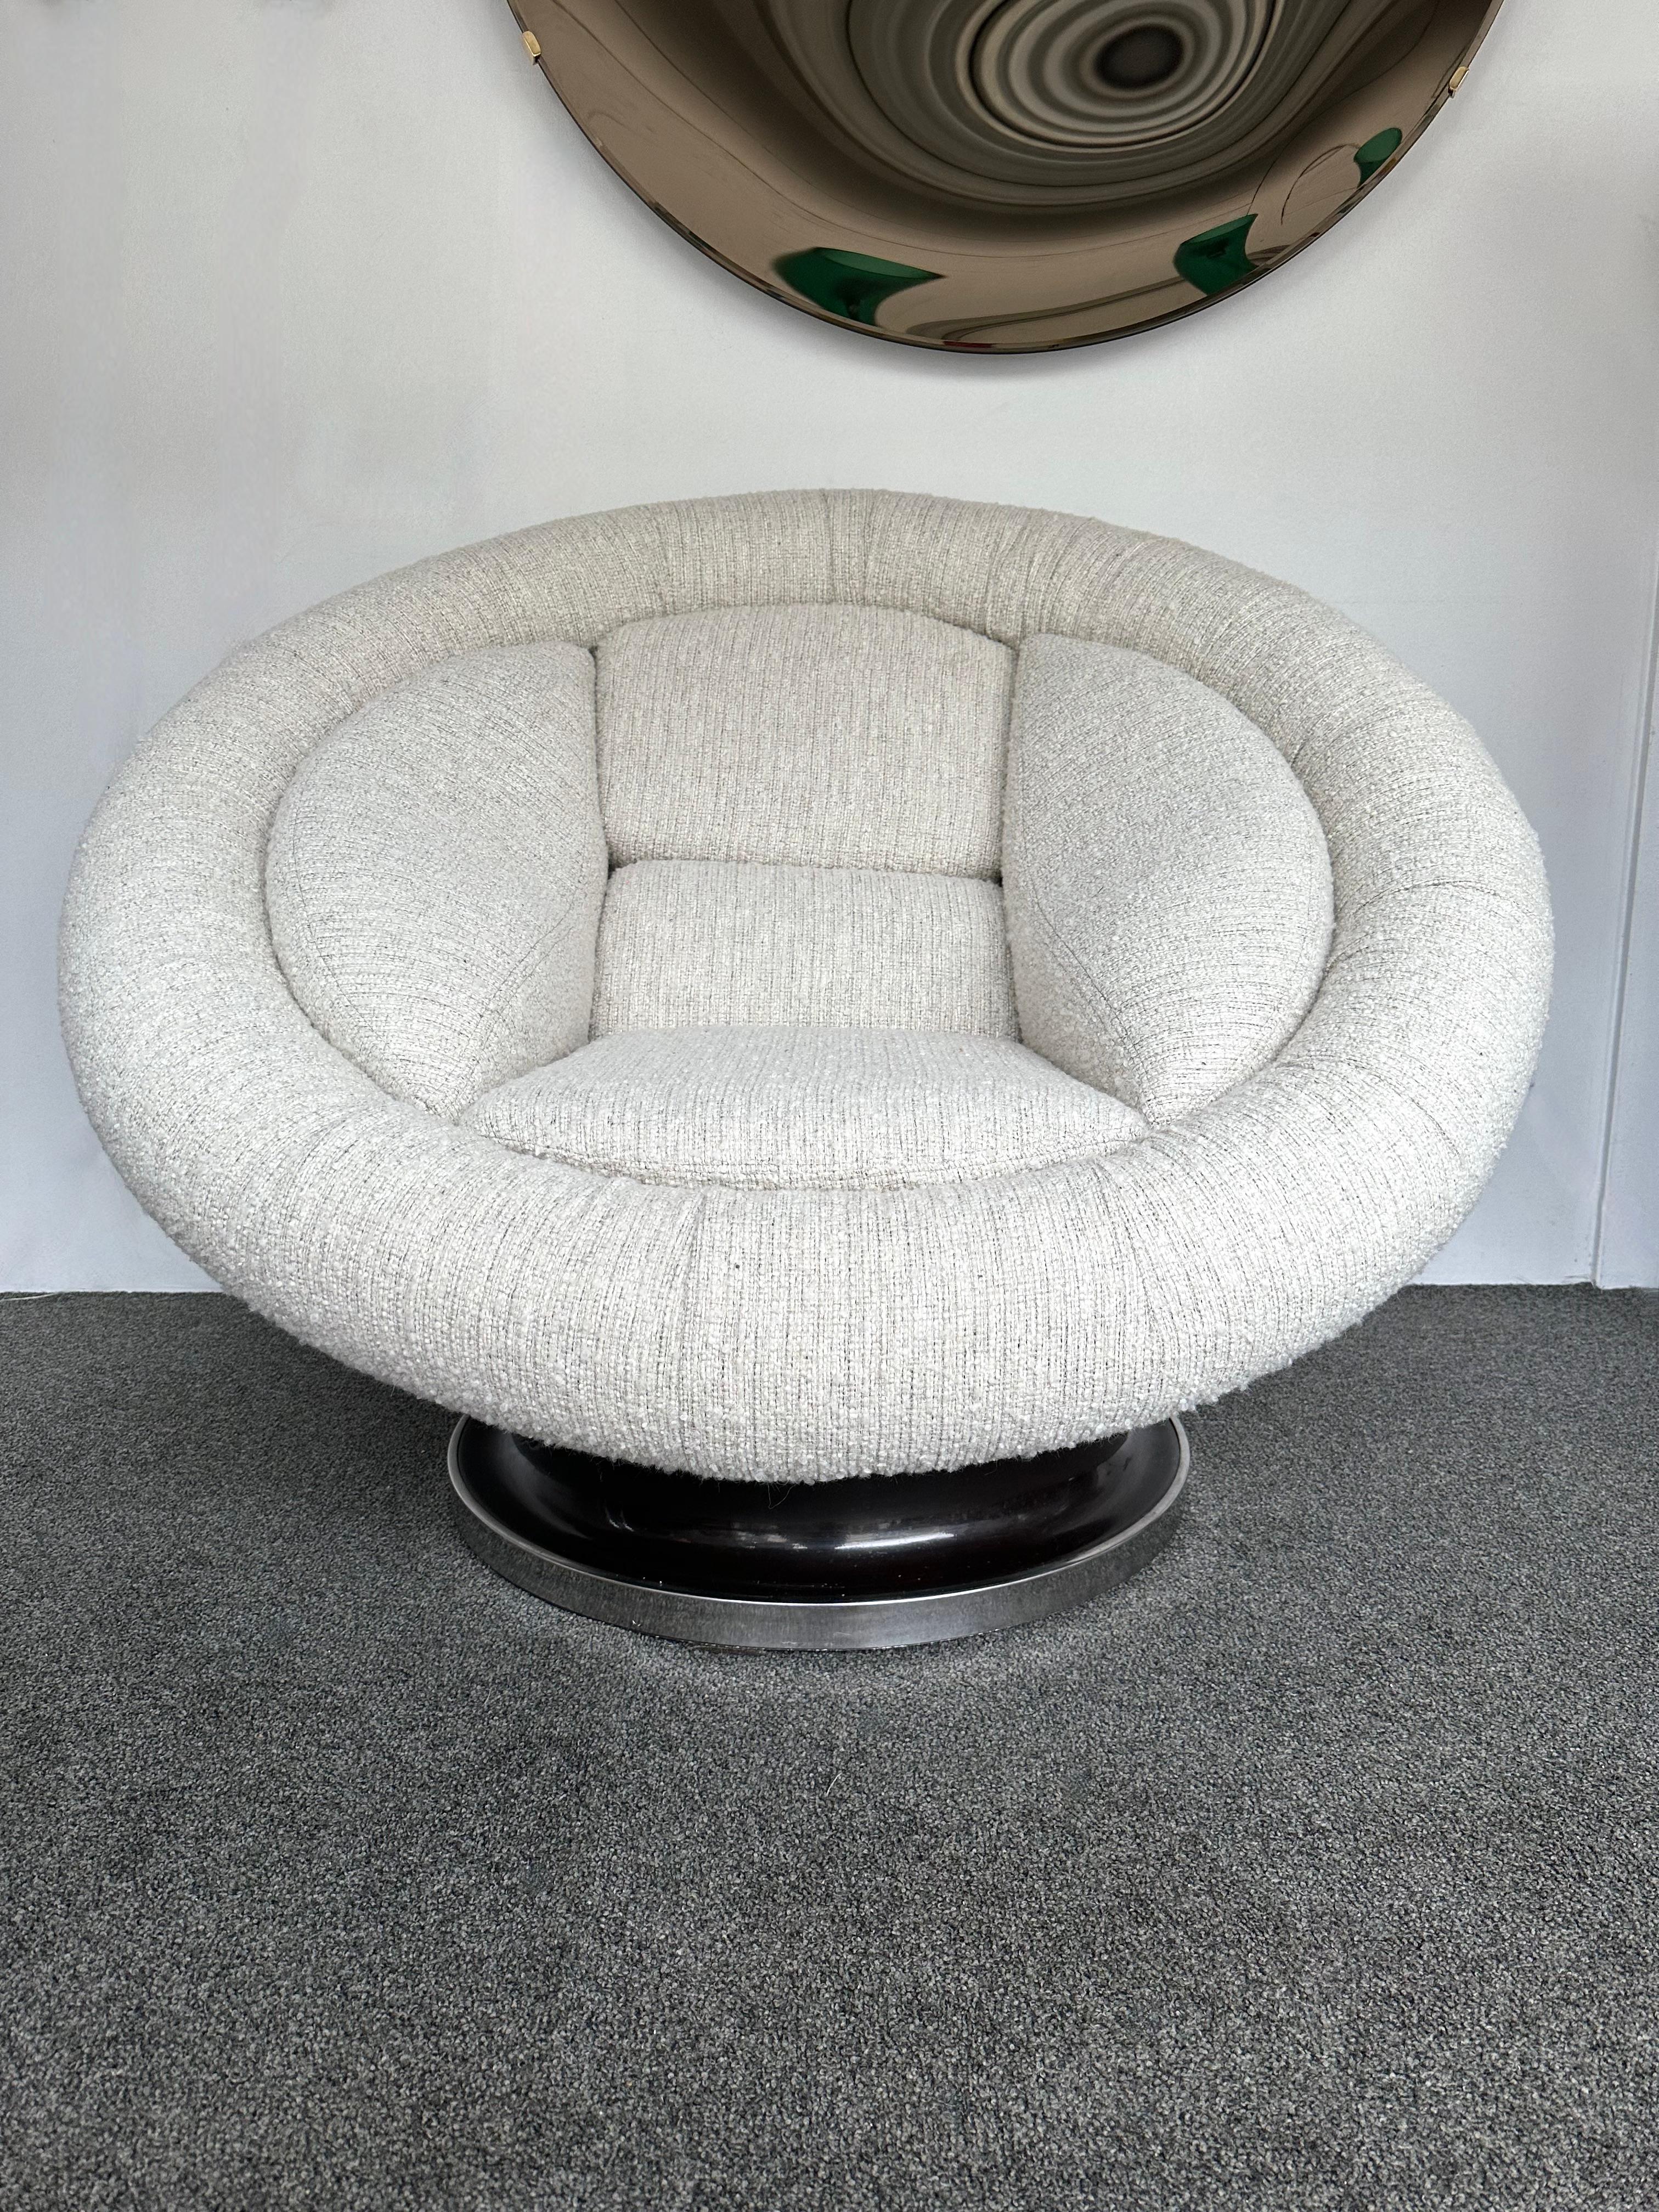 Pair of Large Space Age Saturn Armchairs by Saporiti. Italy, 1970s For Sale 4